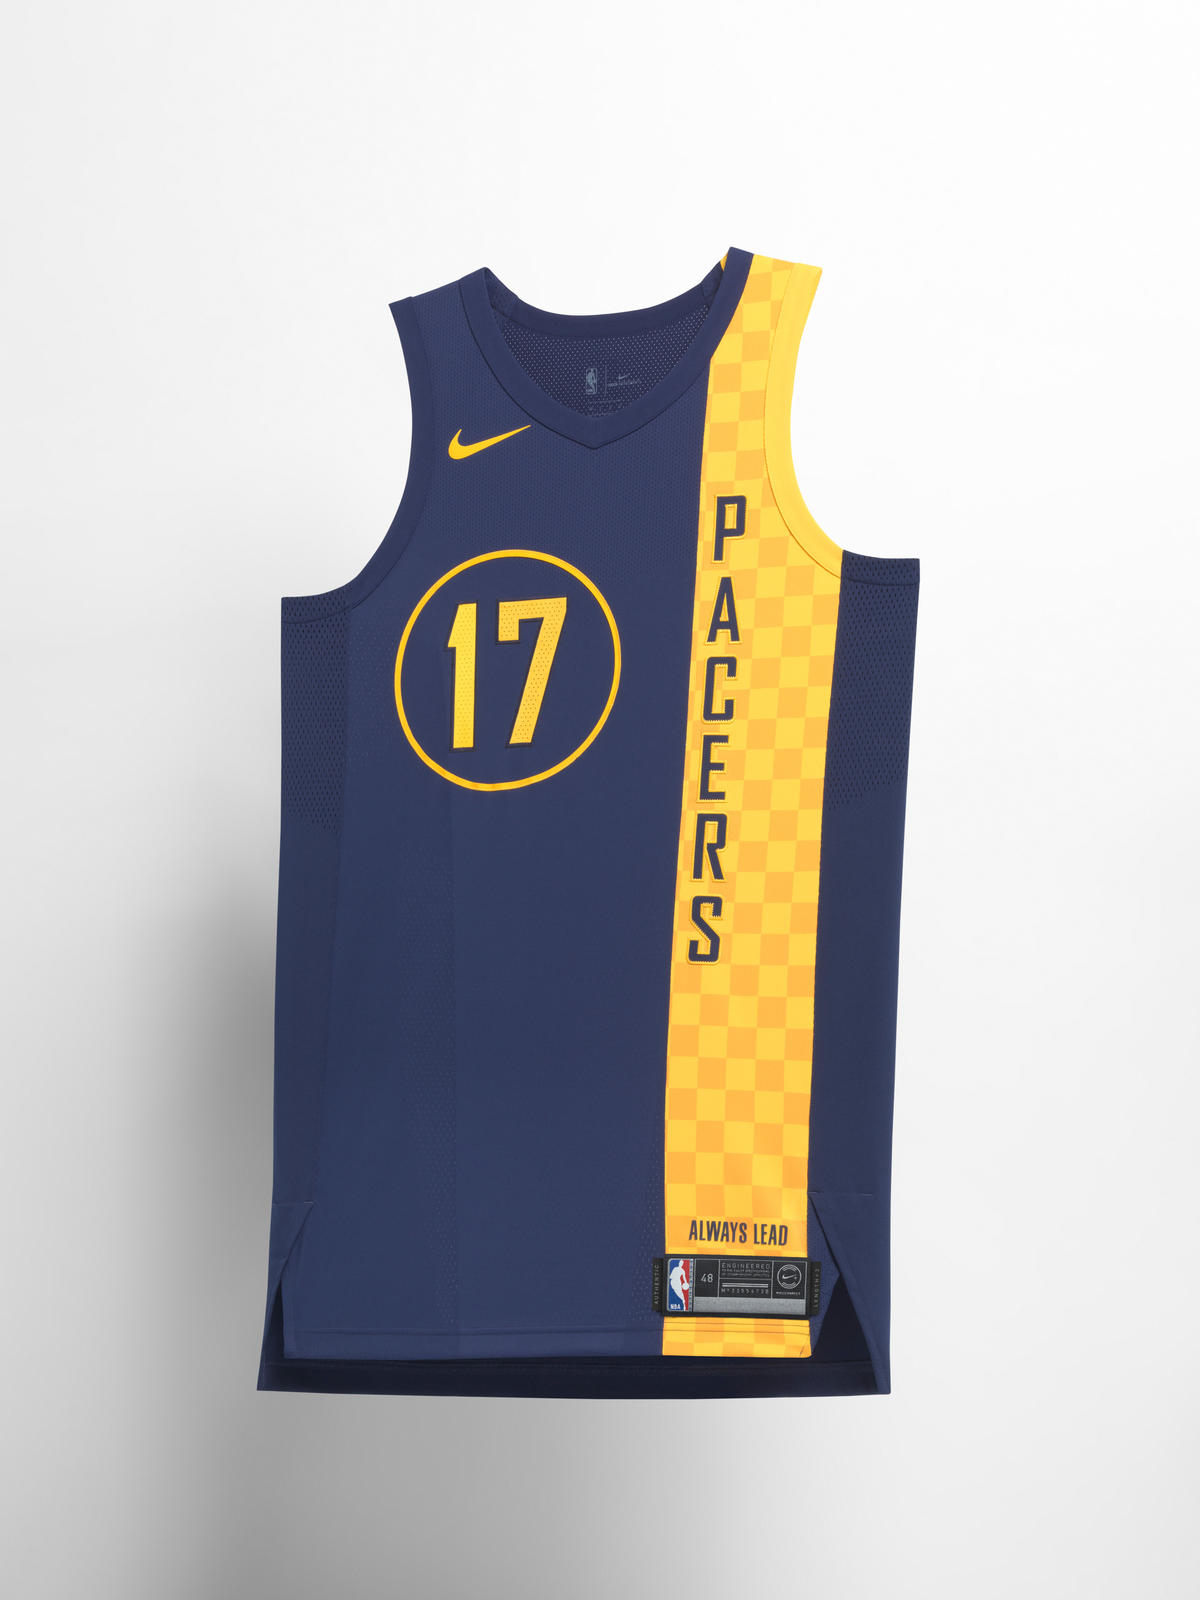 Indiana Pacers: Ranking the past 5 city edition uniforms